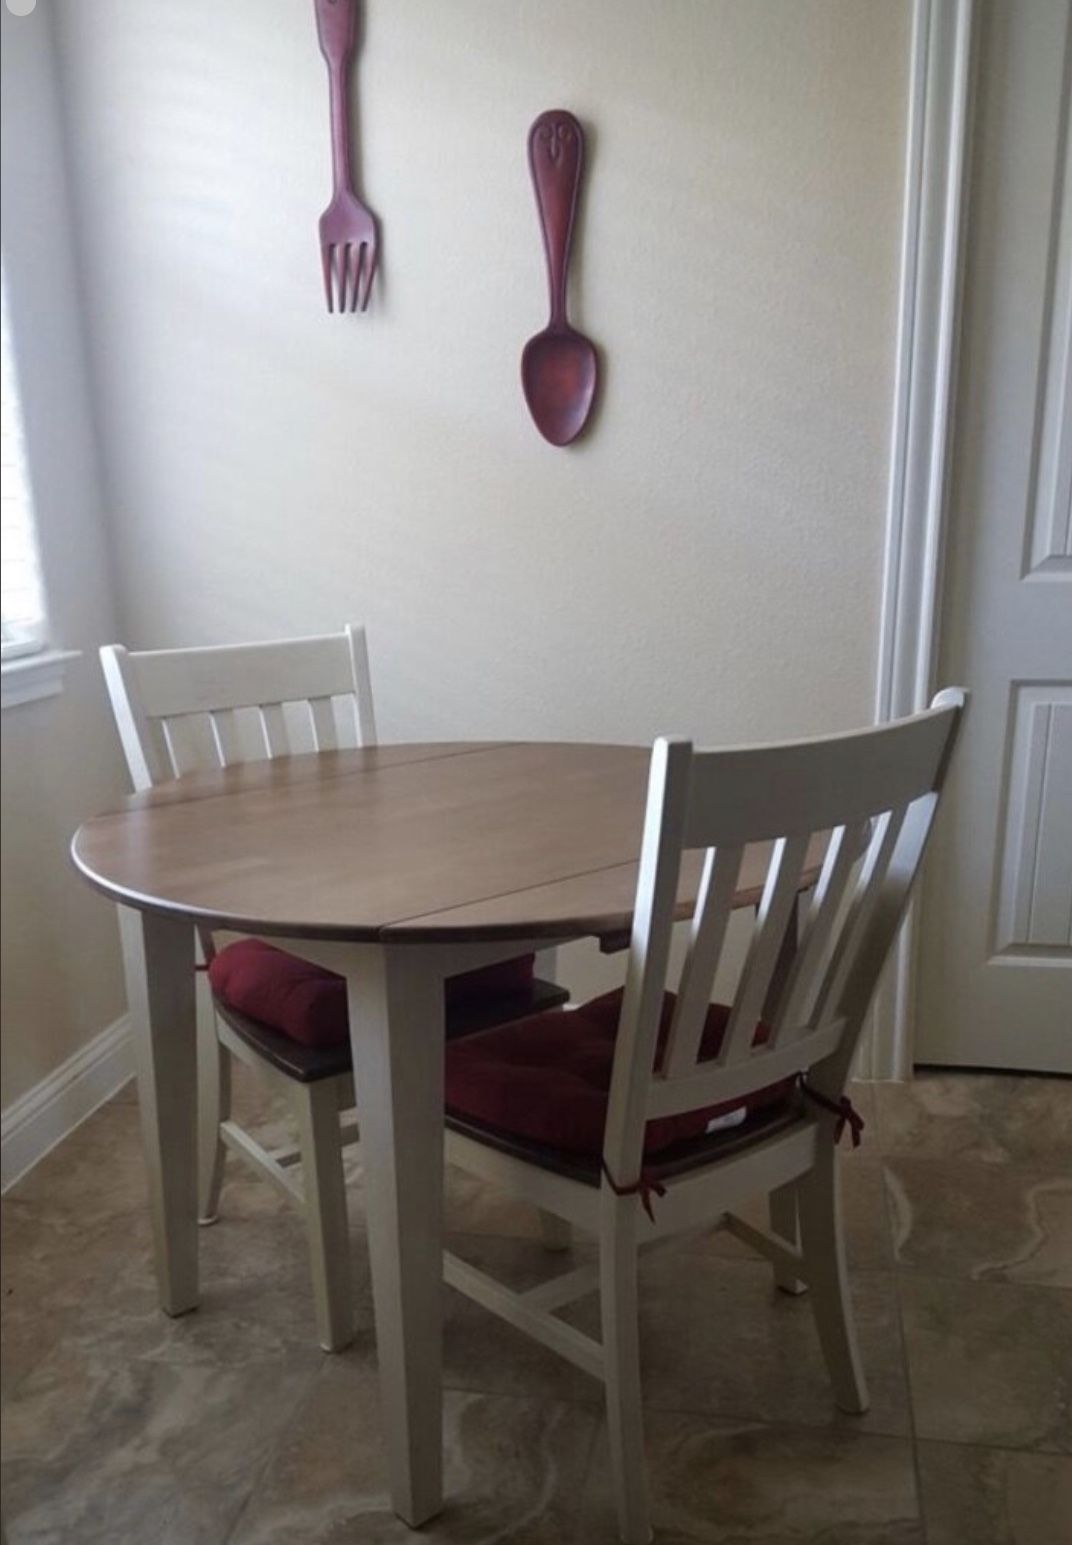 Small Kitchen Table & 2 chairs